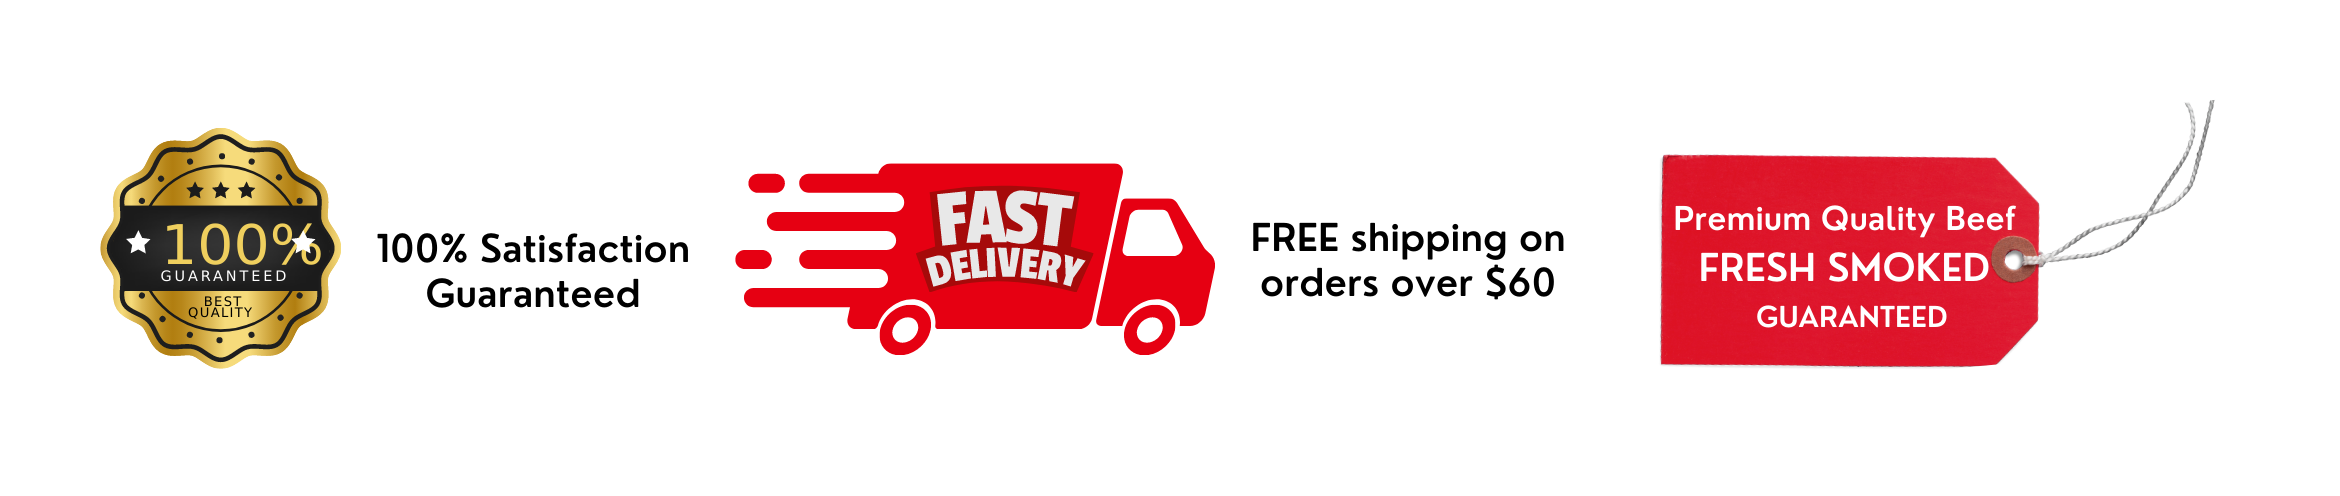 Free shipping on orders $60 or more